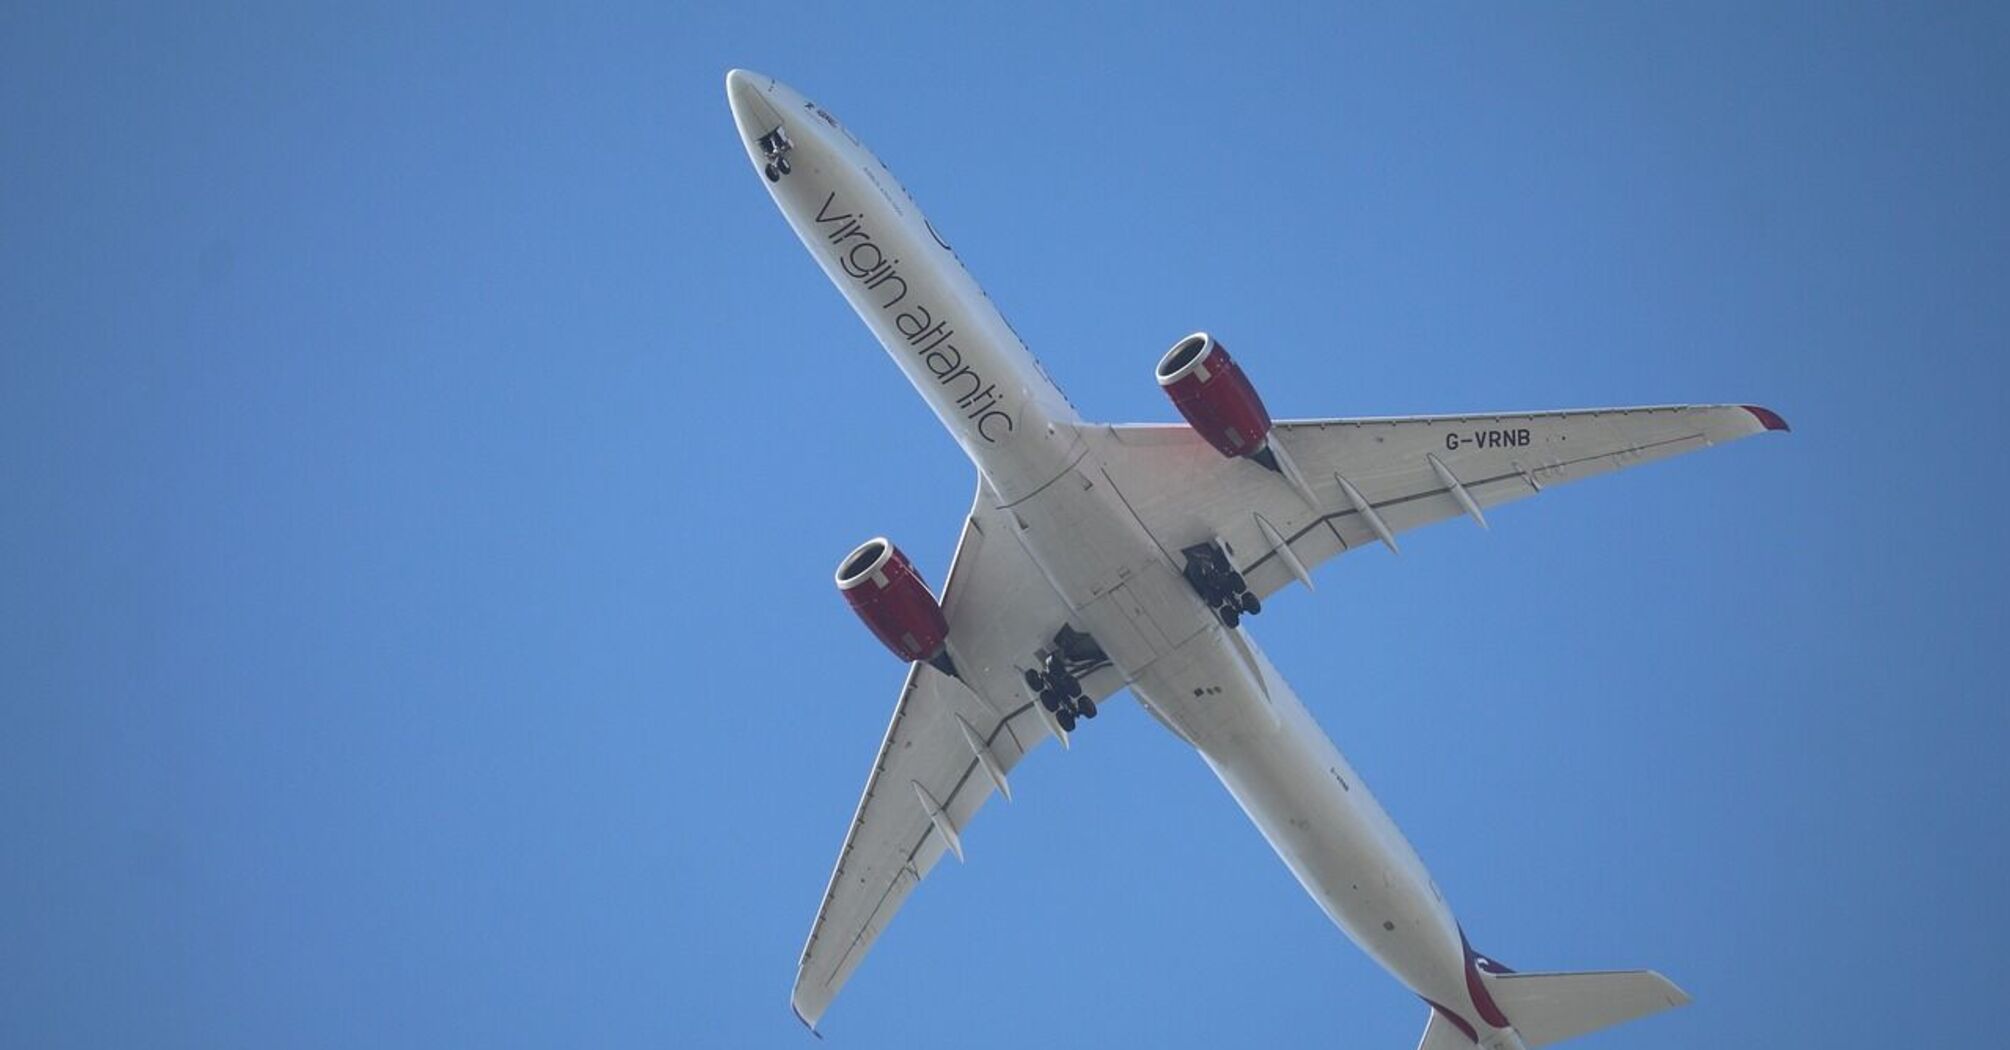 A passenger discovered a malfunction on the wing of a Virgin Atlantic plane: the flight was canceled for additional technical checks